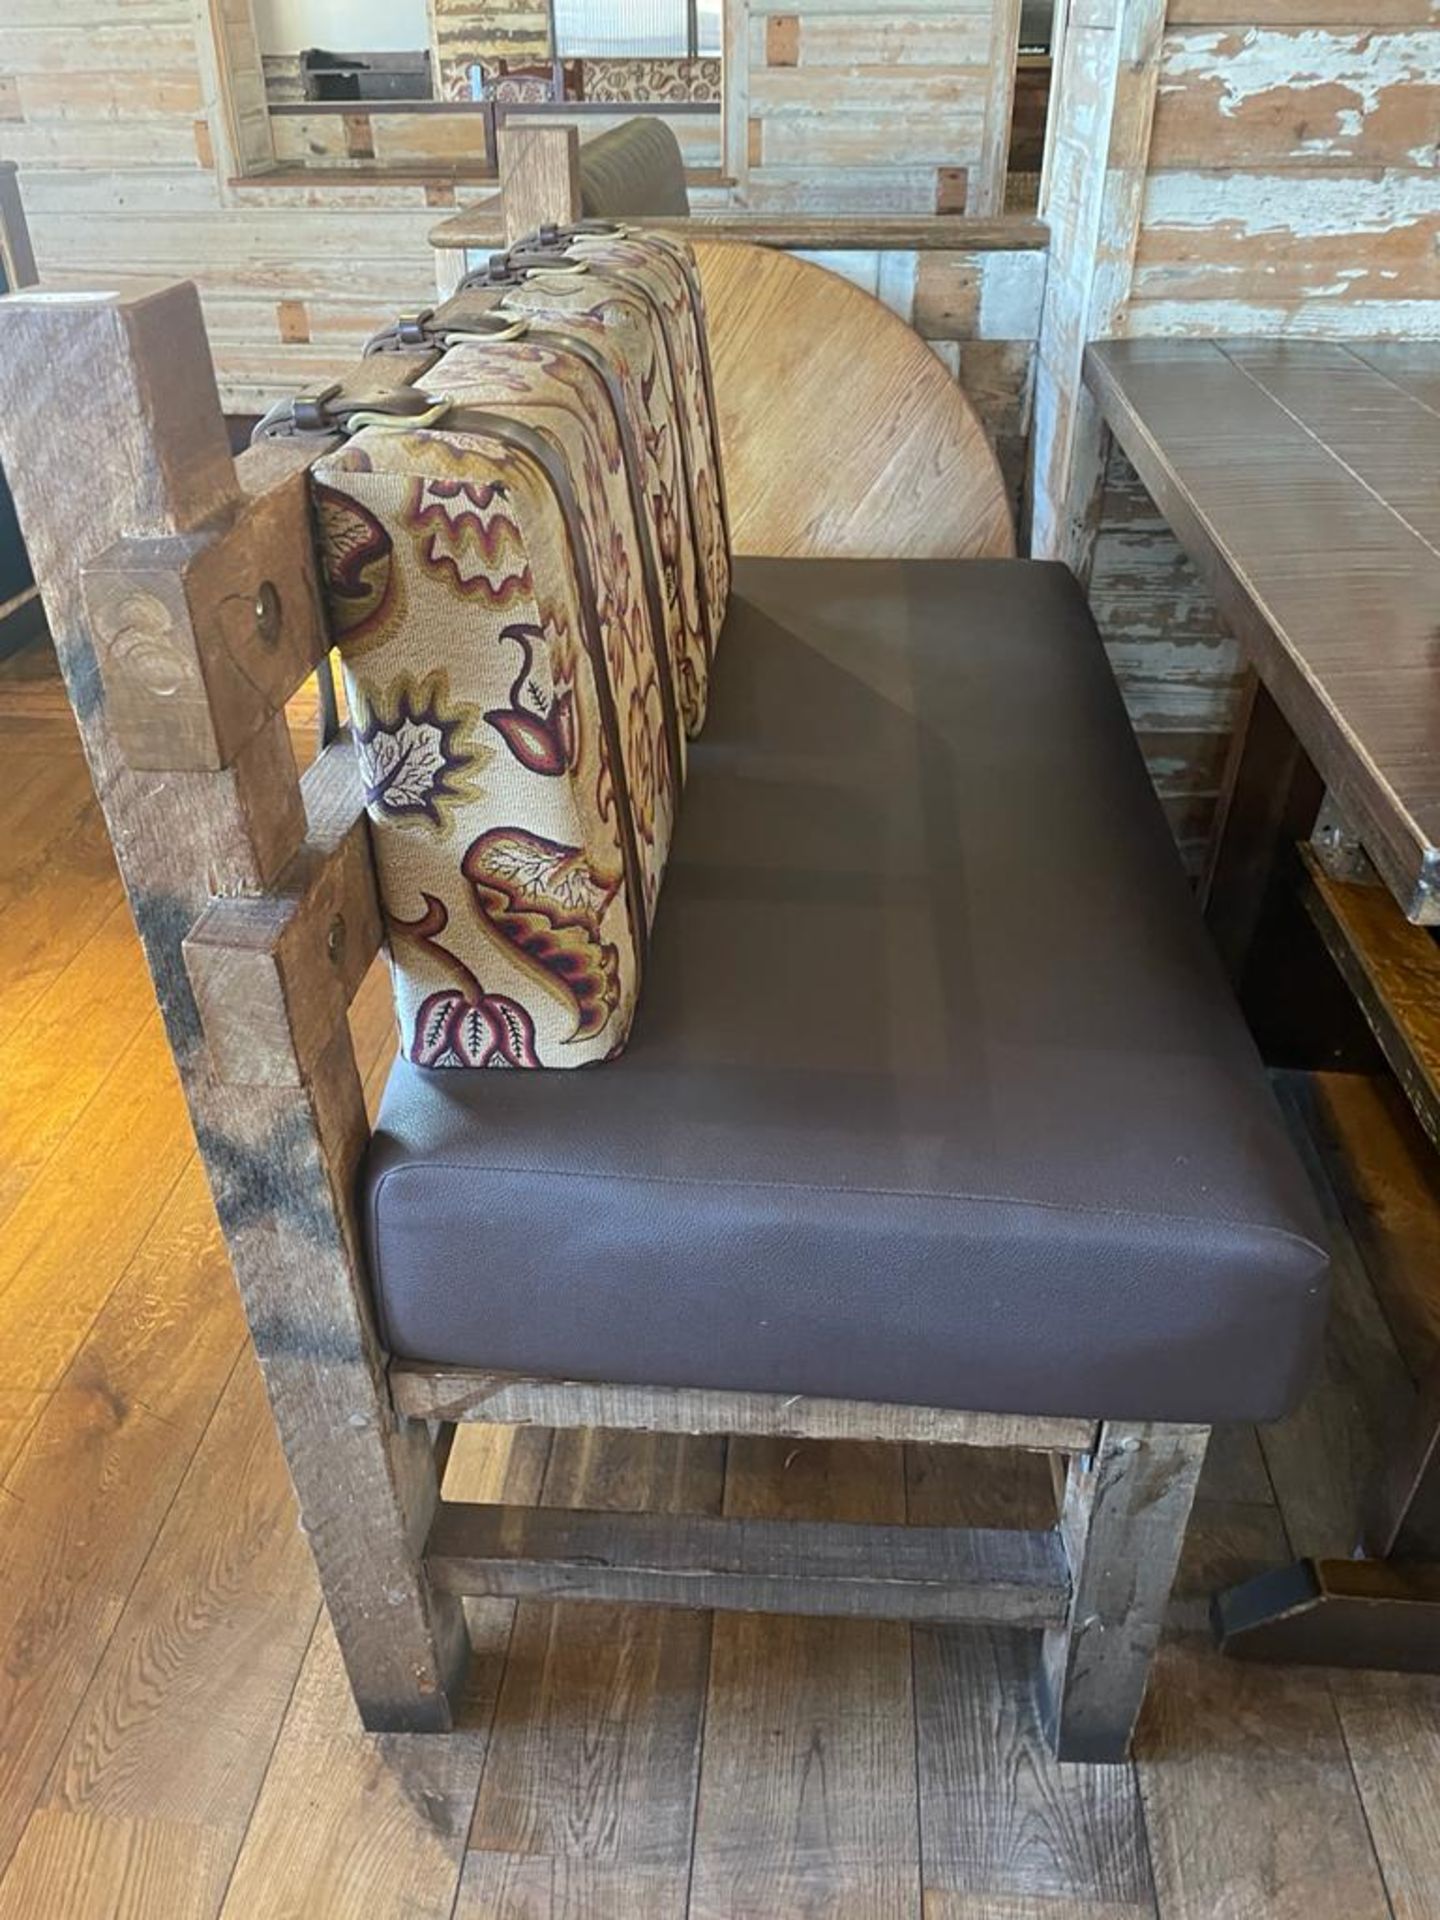 2 x Rustic Seating Benches Featuring Timber Frames, Brown Faux Leather Seat Pads and Floral Fabric - Image 8 of 13